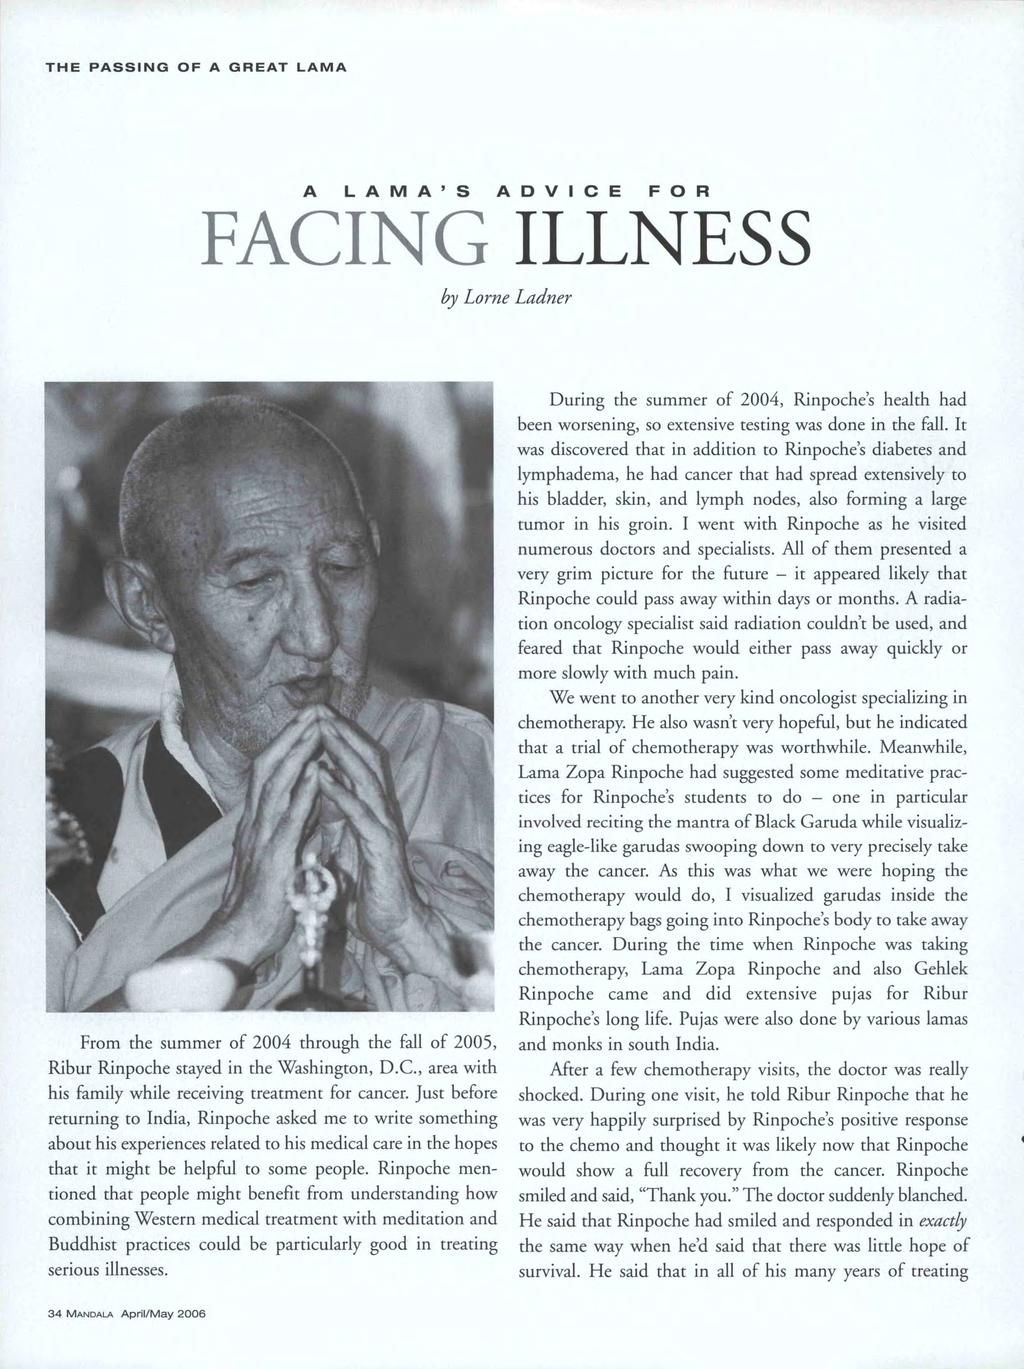 THE PASSING OF A GREAT LAMA A LAMA'S ADVICE FOR FACING ILLNESS by Lorne Ladner From the summer of 2004 through the fall of 2005, Ribur Rinpoche stayed in the Washington, D.C., area with his family while receiving treatment for cancer.